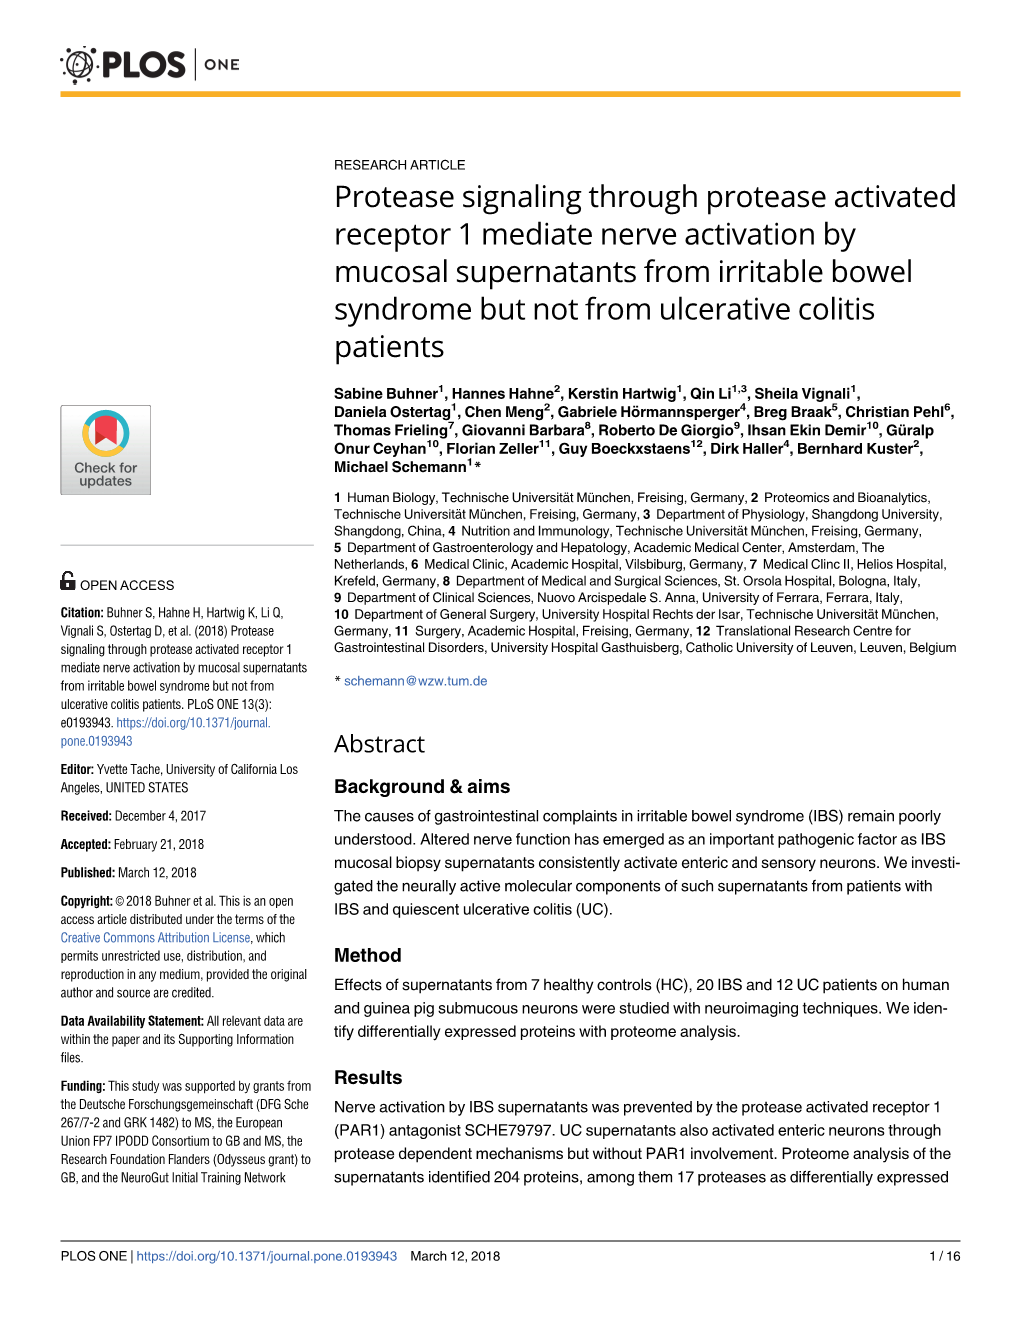 Protease Signaling Through Protease Activated Receptor 1 Mediate Nerve